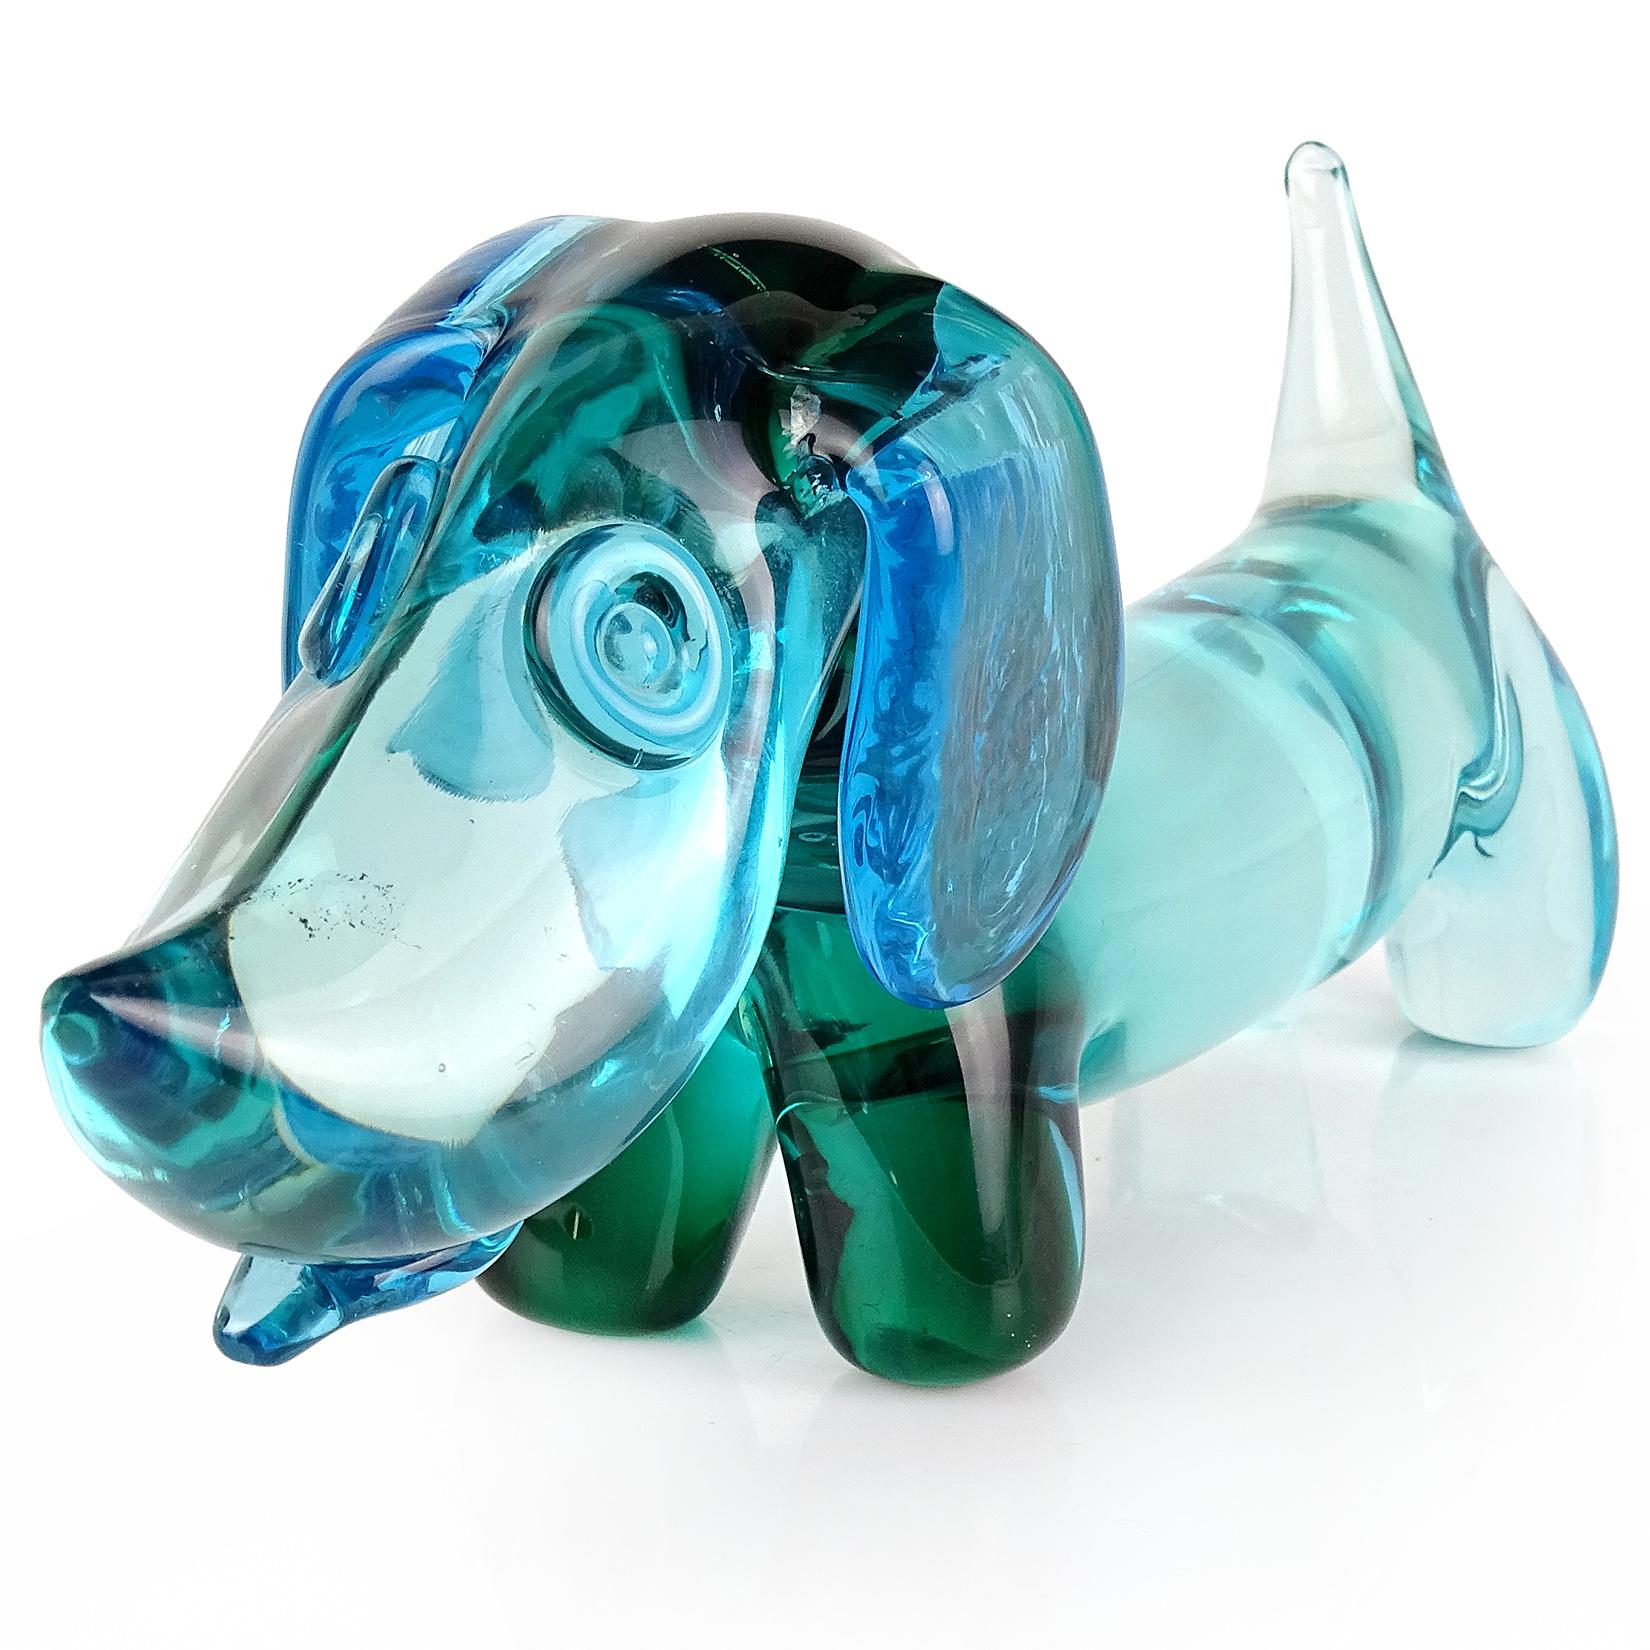 Beautiful and cute Murano hand blown Sommerso aqua, blue, green, Italian art glass Dachshund puppy dog sculpture. Documented to designer Archimede Seguso. The puppy has a blue collar, ears, and tongue sticking out. A must for the dog lover in your